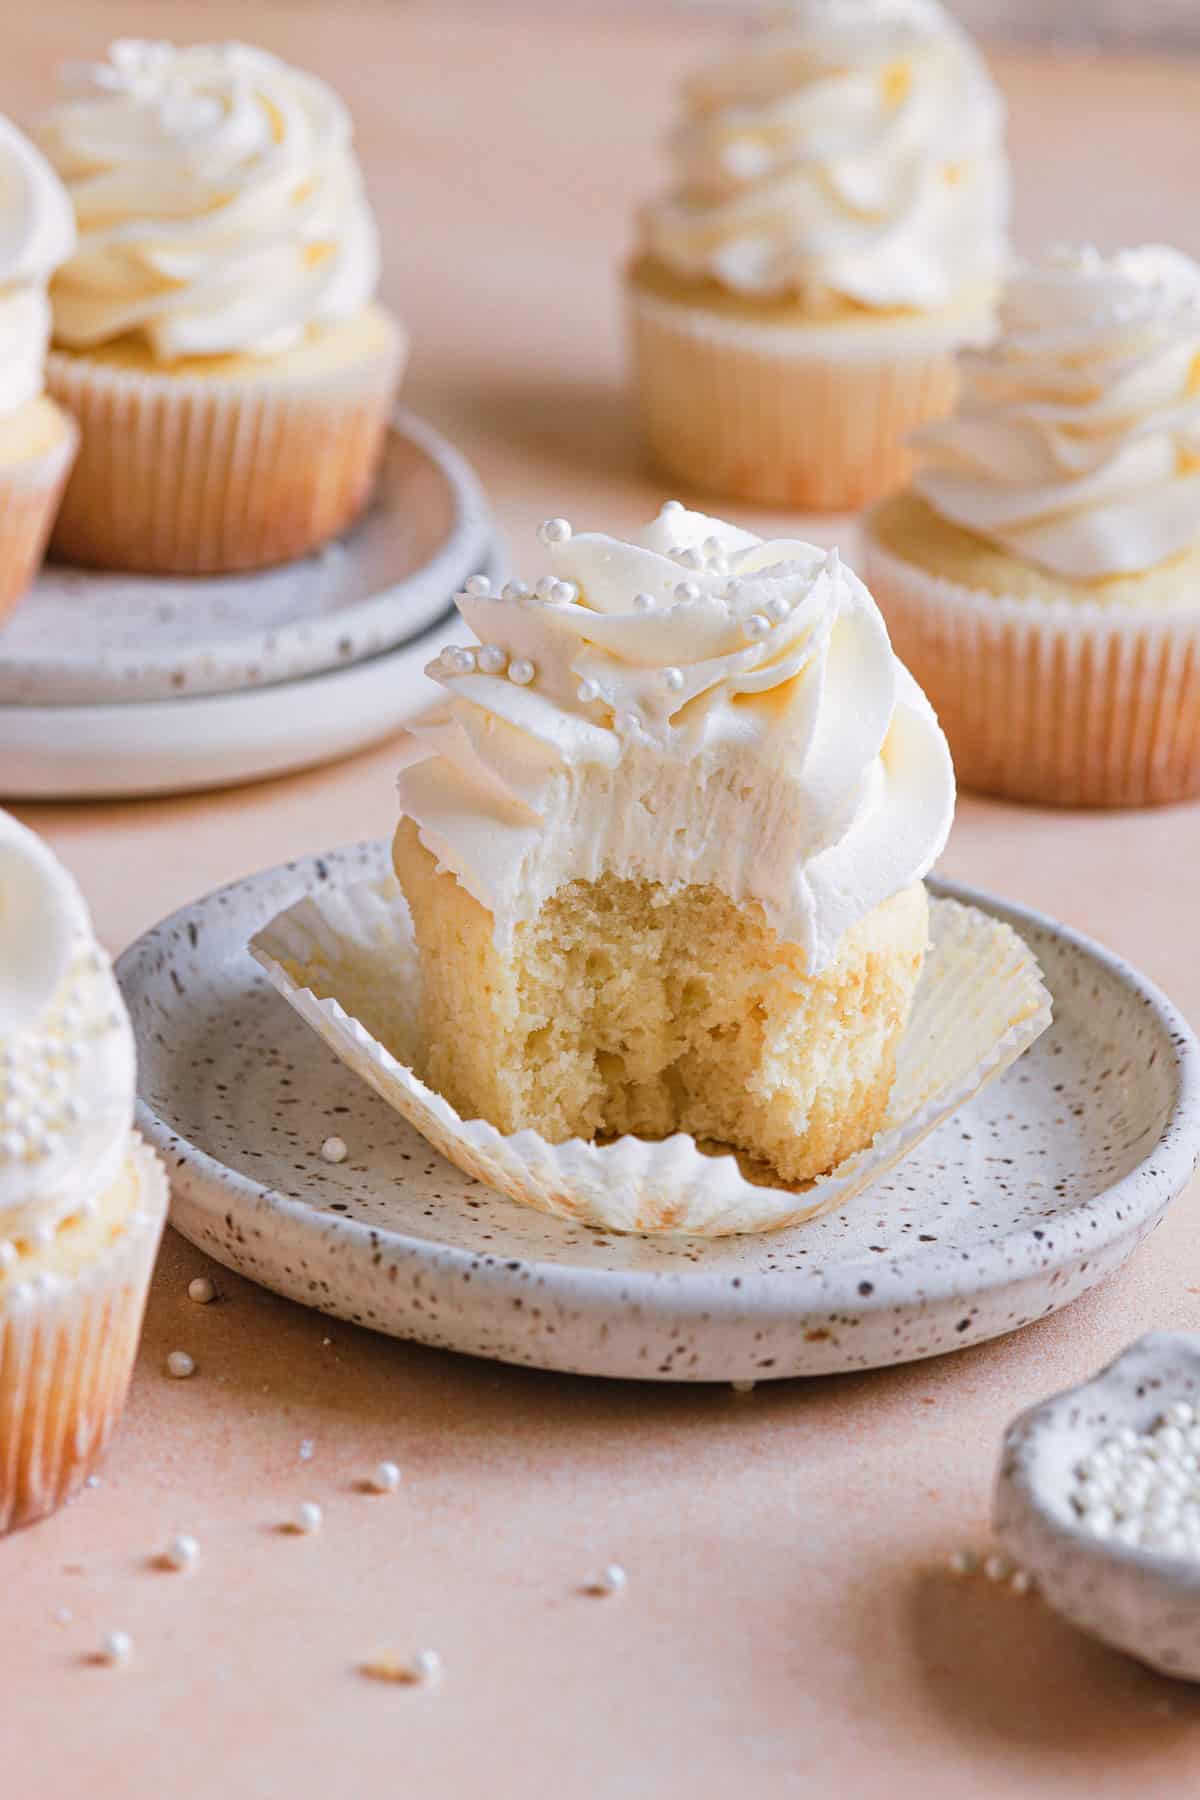 A white speckled plate with a vanilla cupcake with the wrapper down and a bite taken out of it in the middle and vanilla cupcakes in the back.